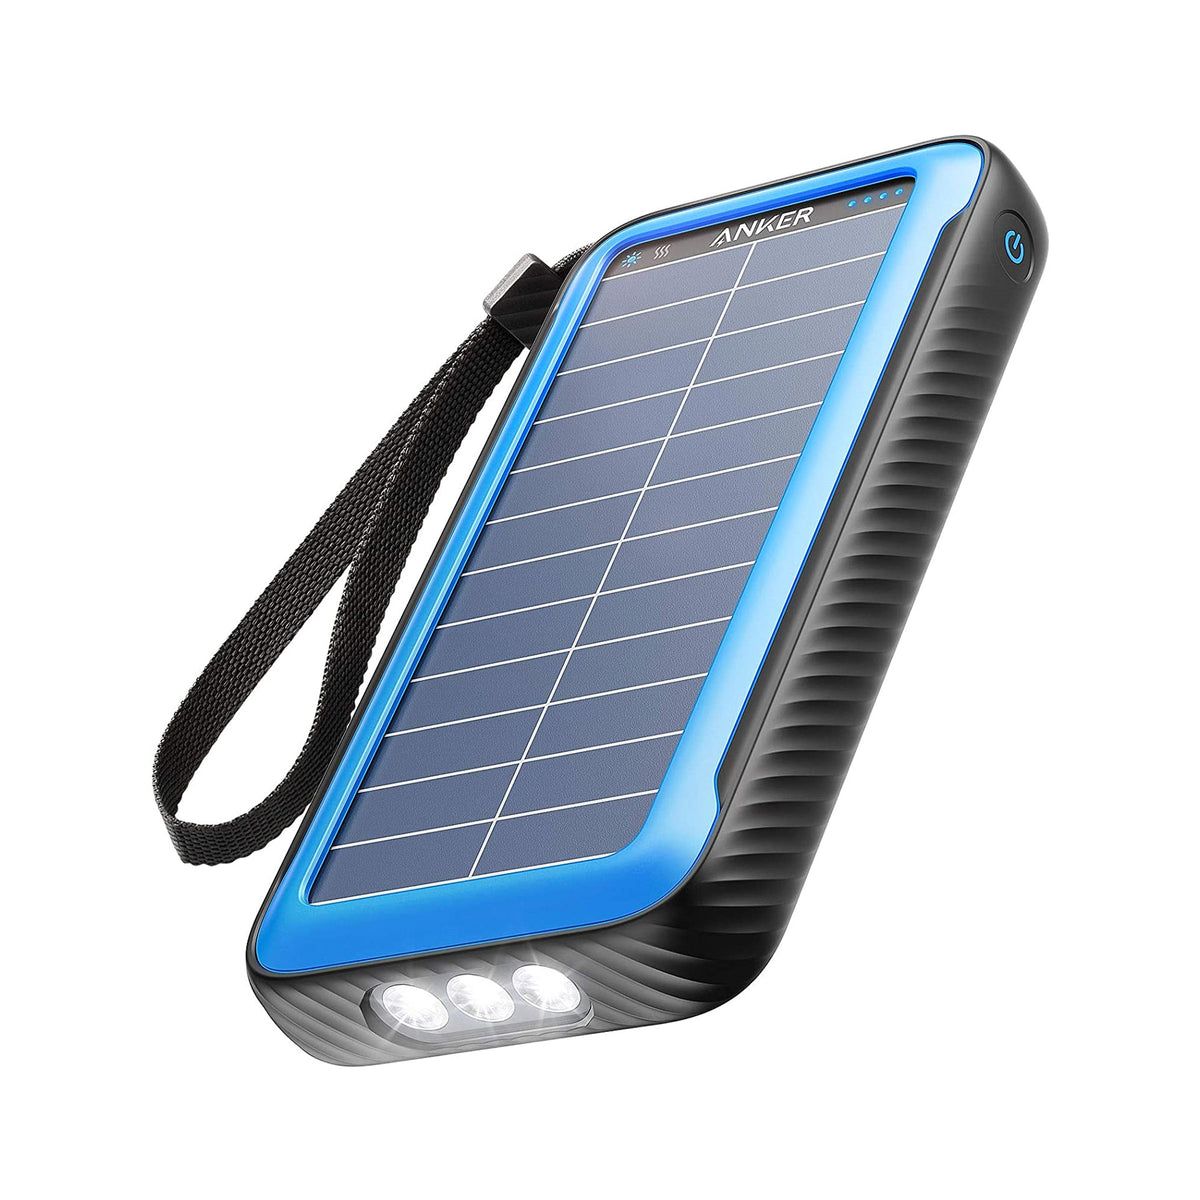 Anker PowerCore Solar 20000 - are solar power banks worth it?